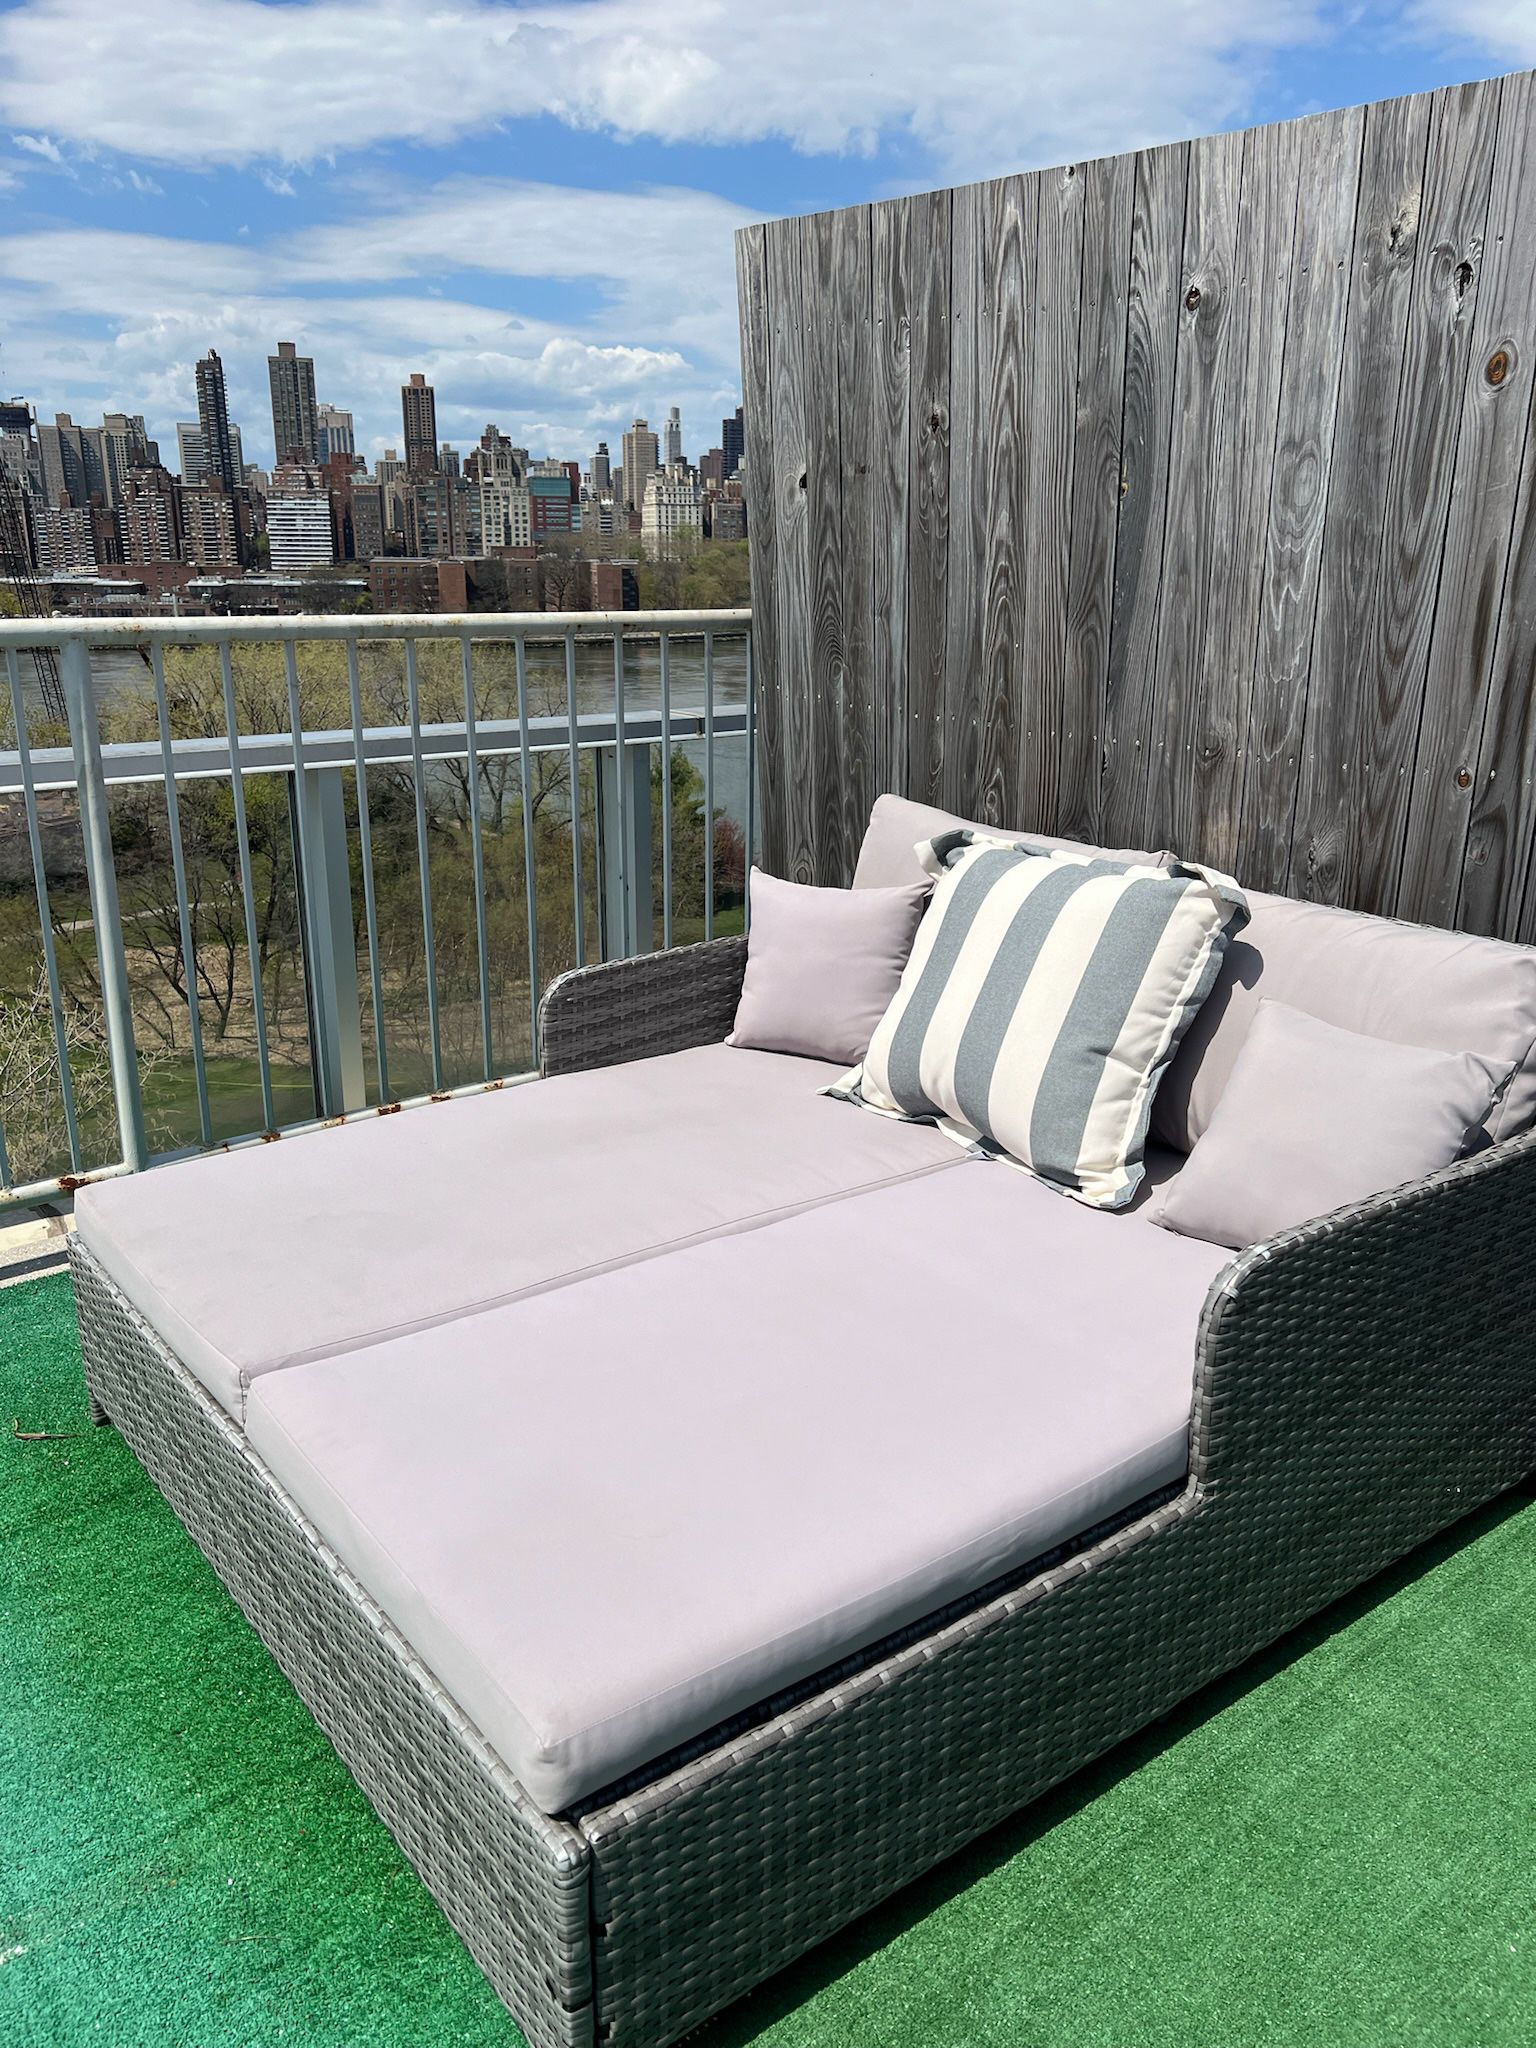 LIKE NEW Safavieh outdoor daybed double sized and cushions and pillows